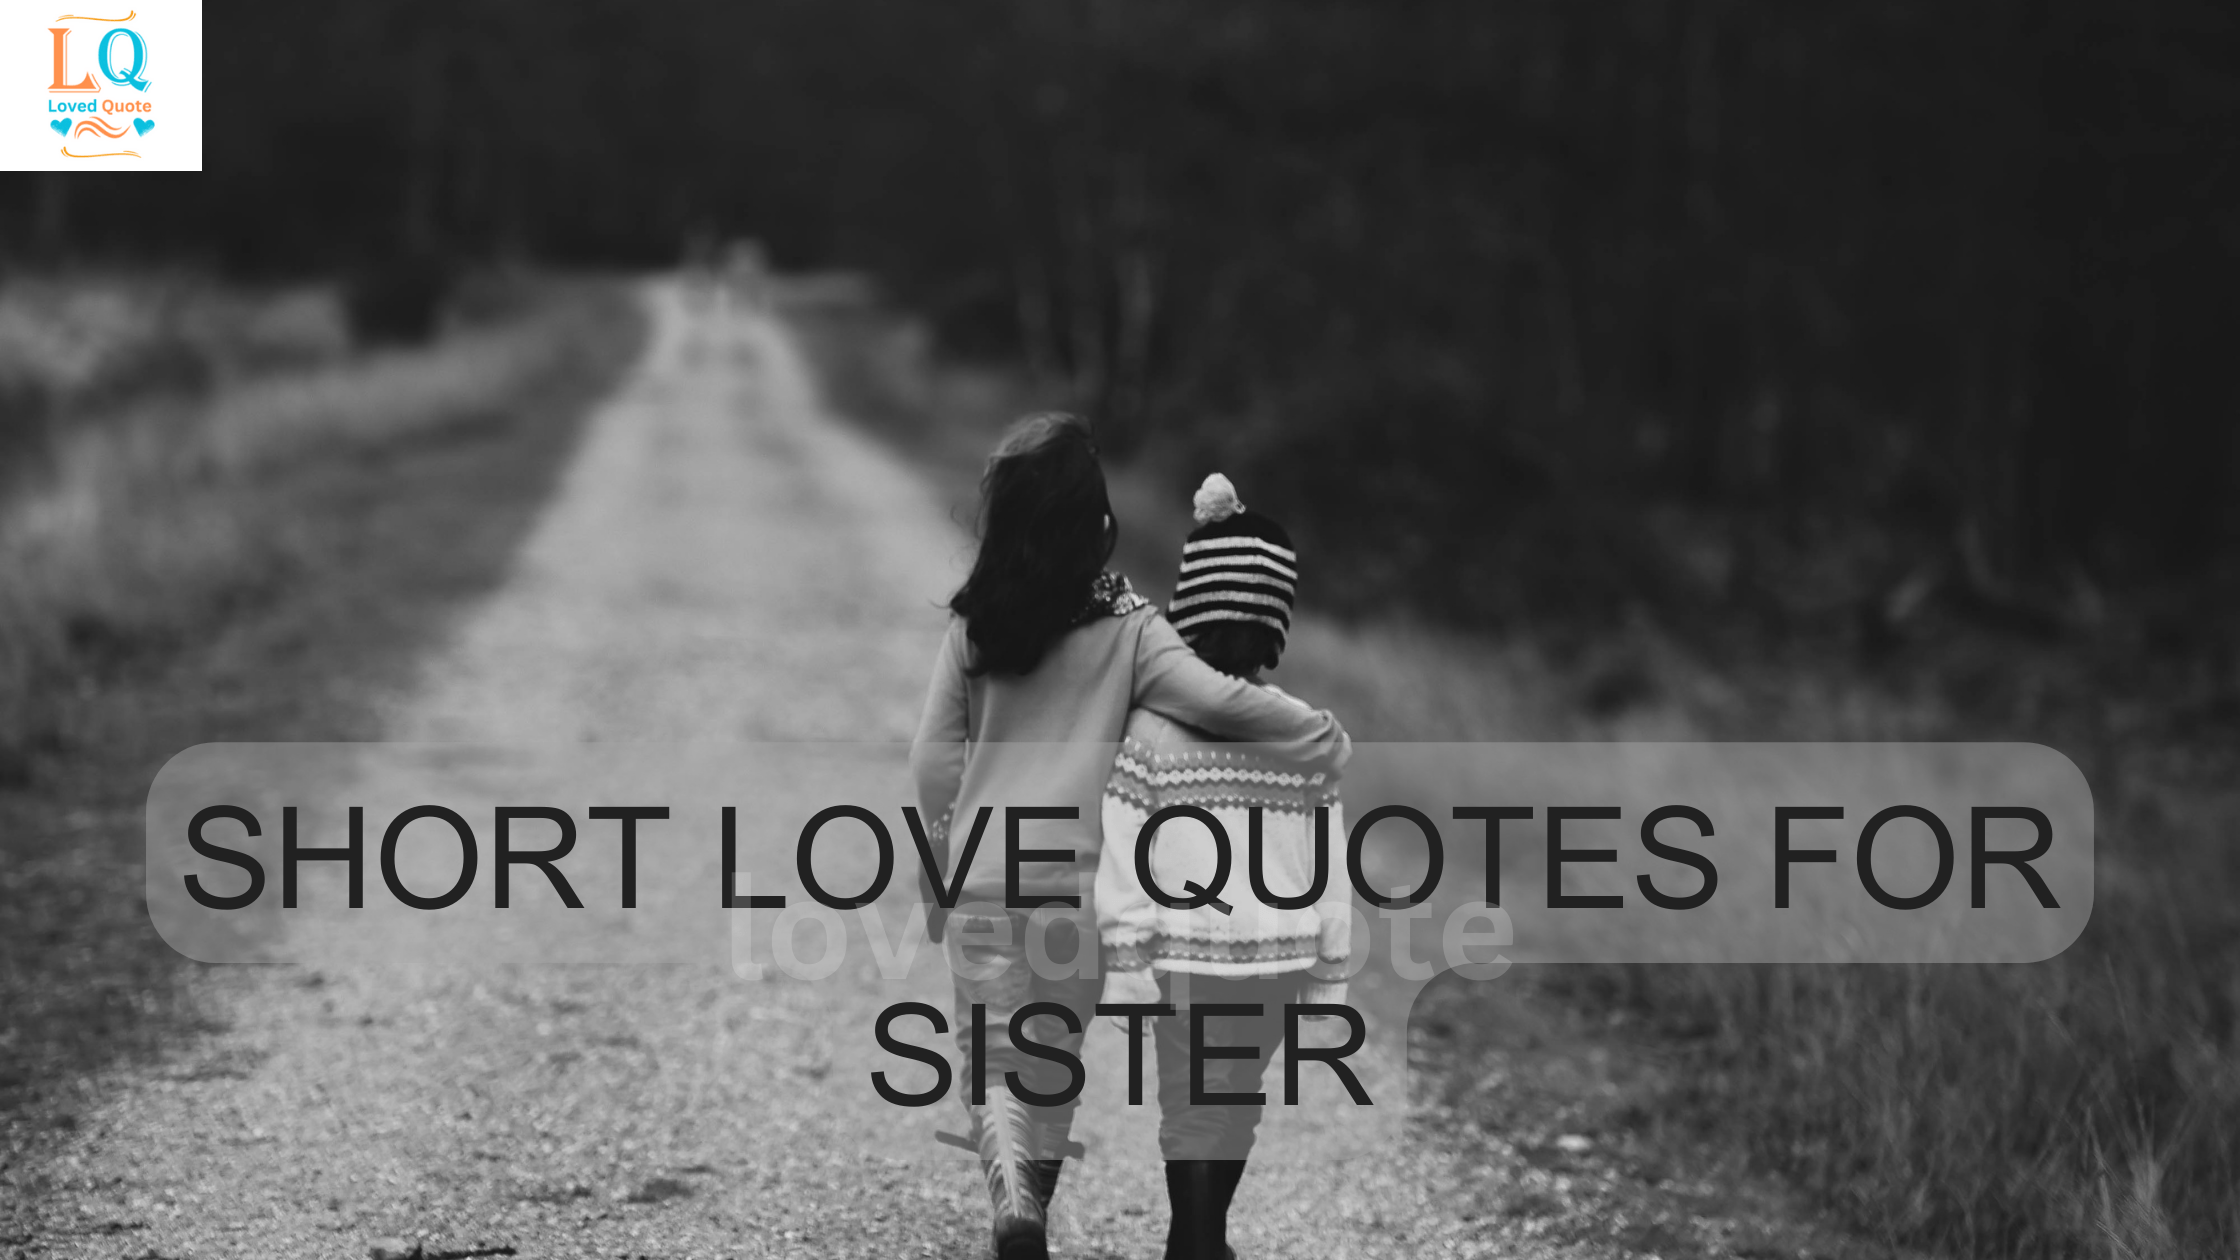 Short Love Quotes for Sister